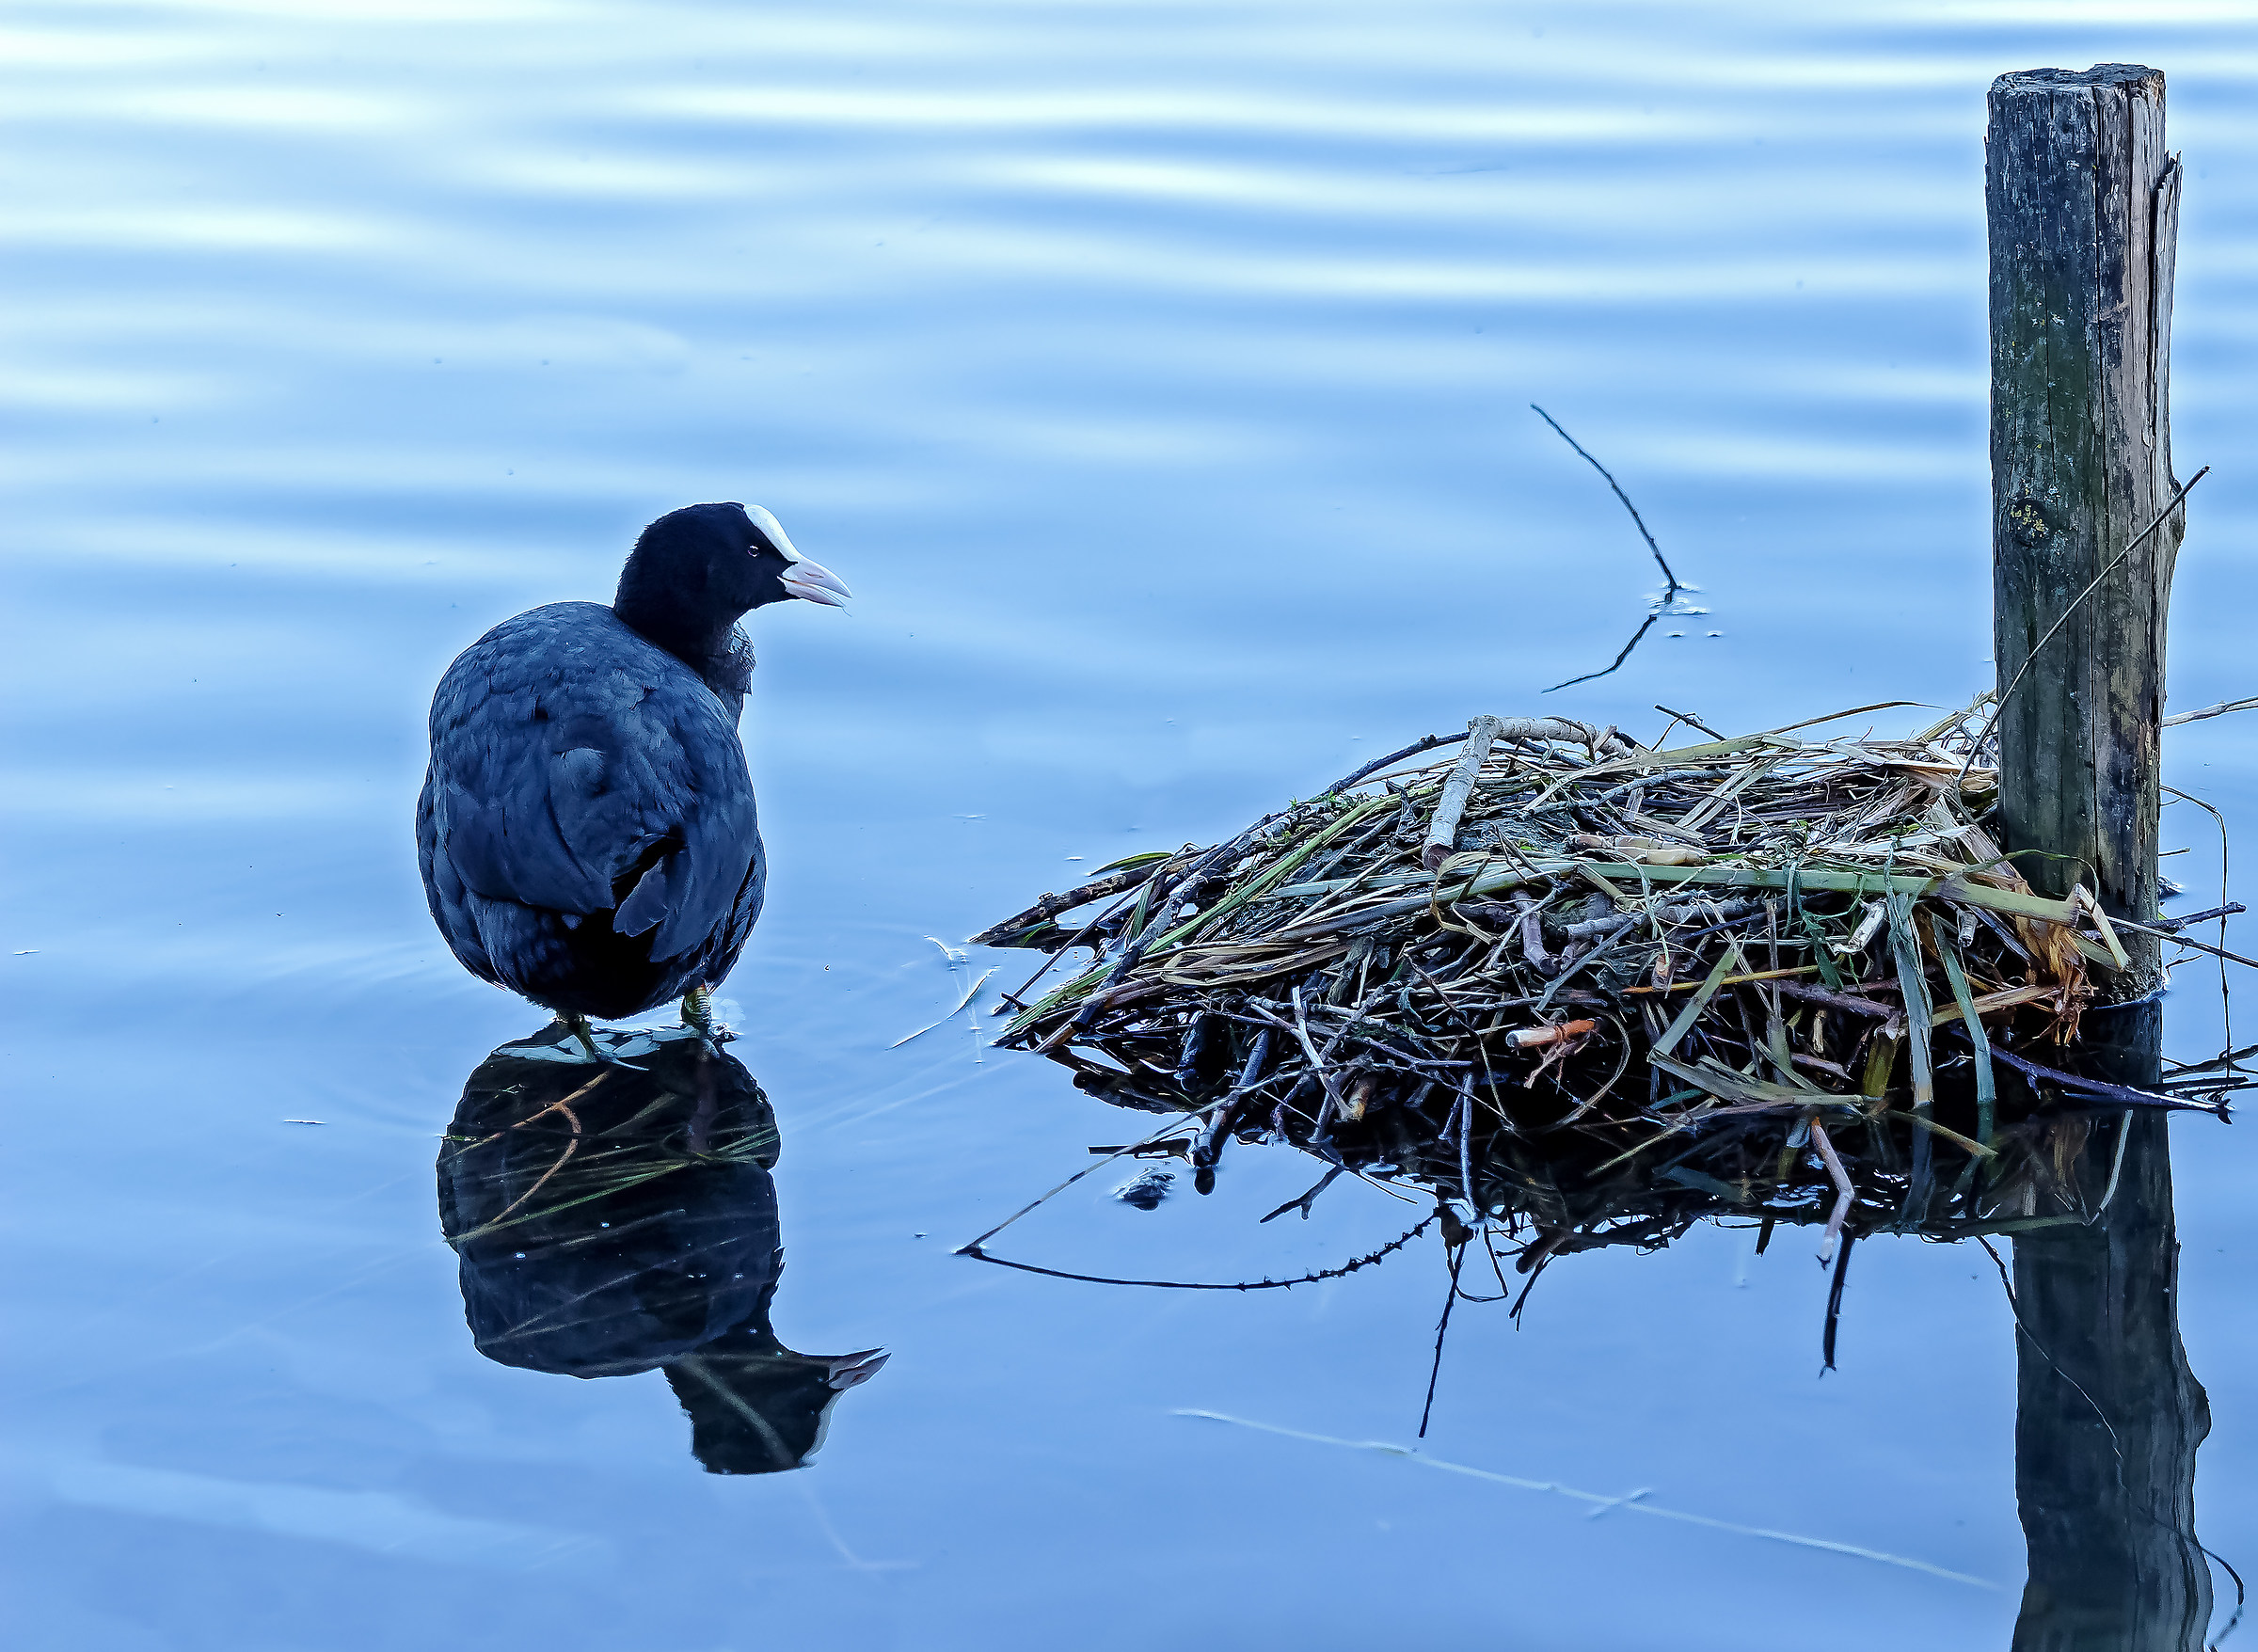 The nest Coot is ready...